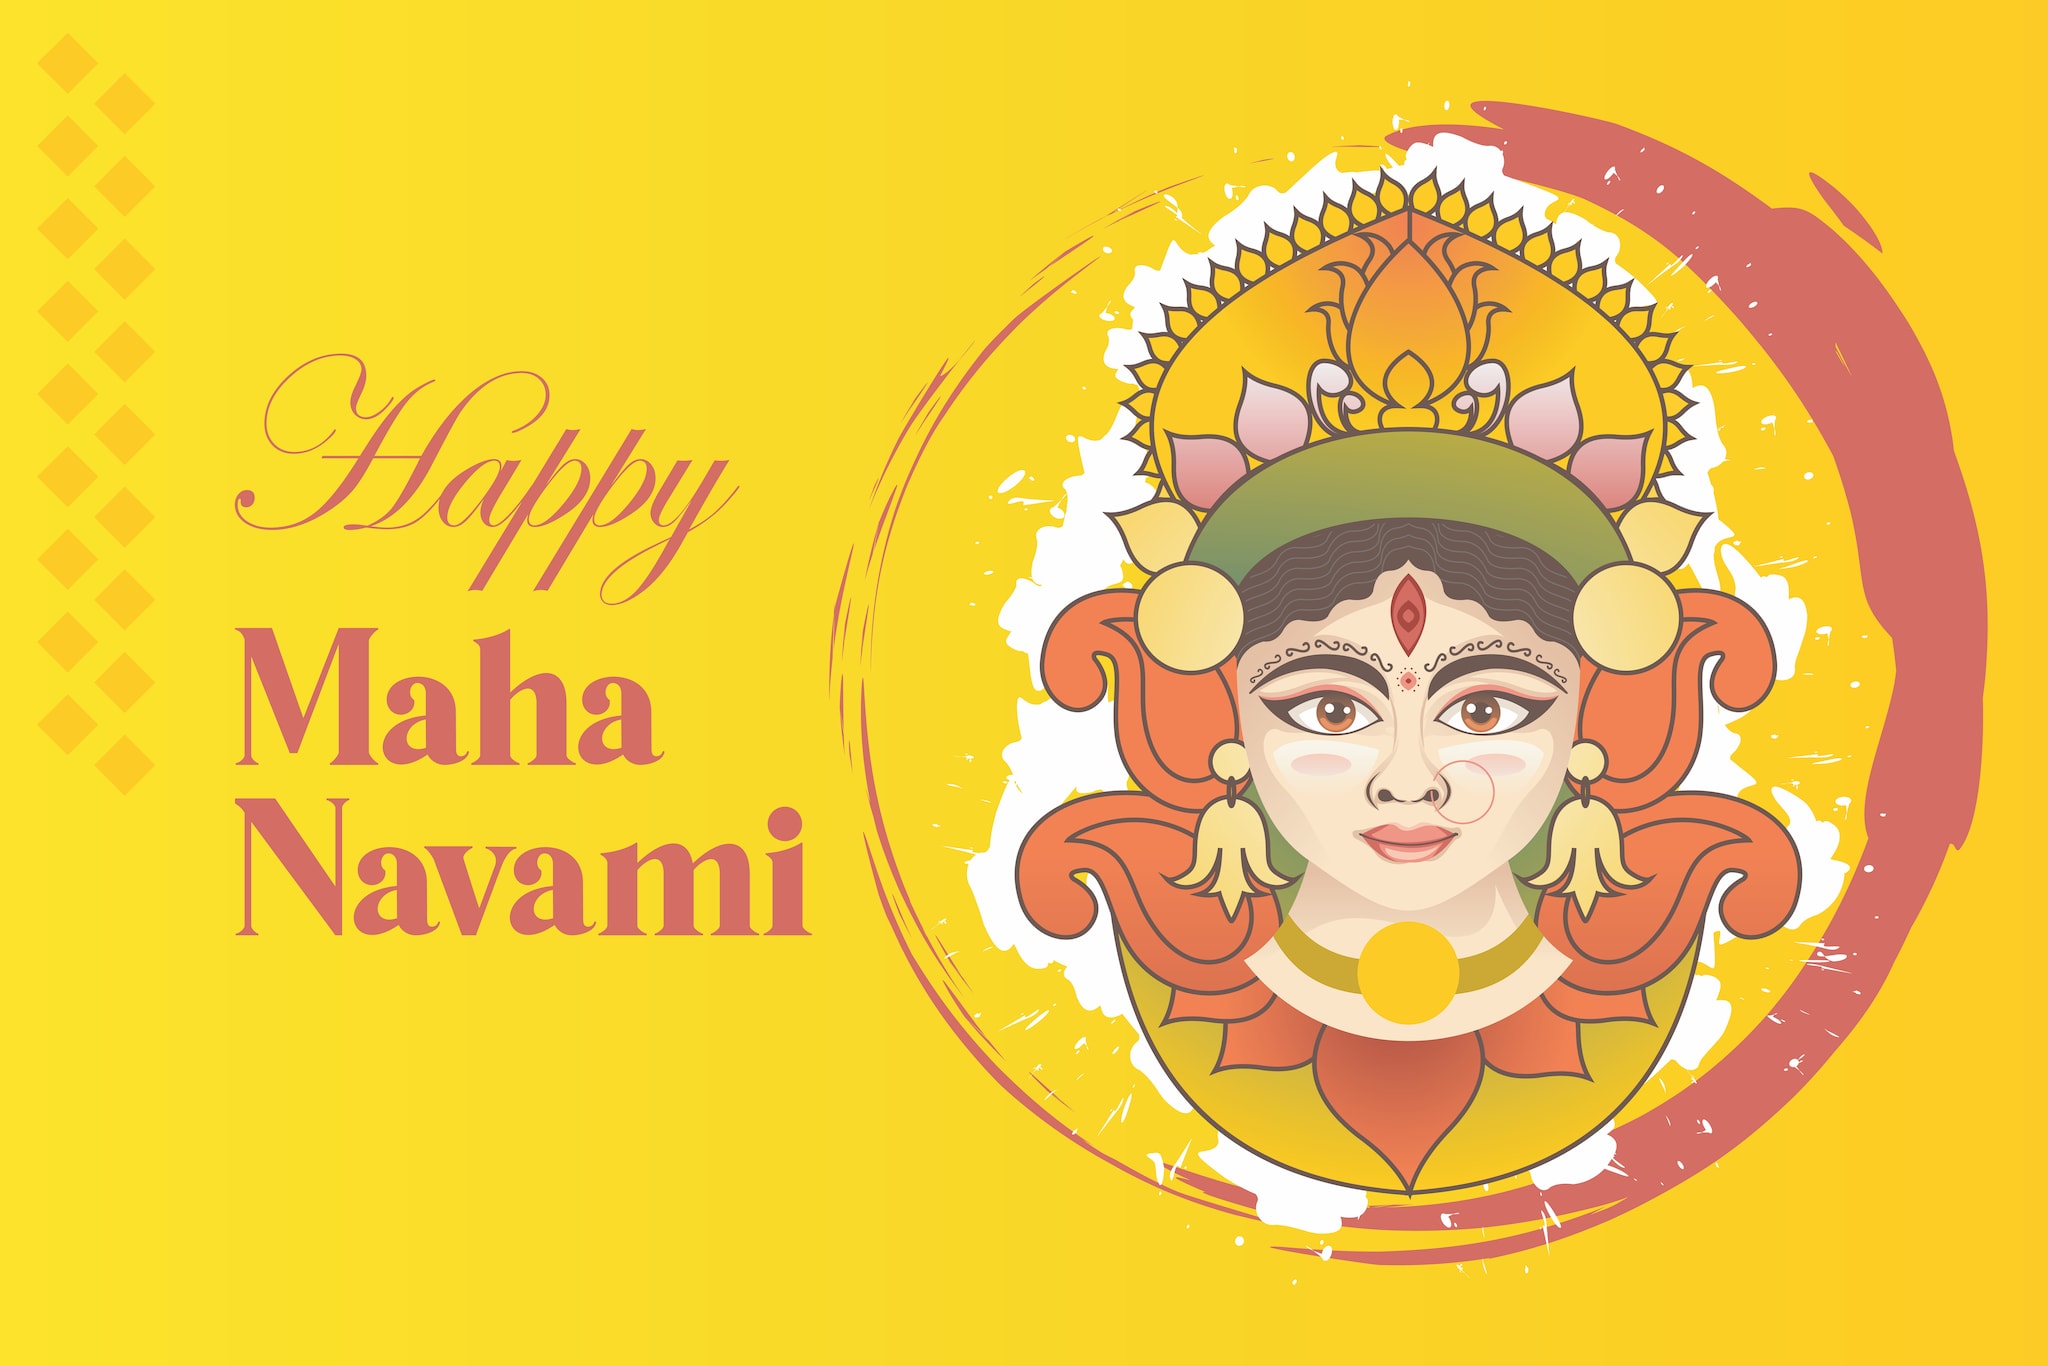 Happy Maha Navami 2022: Best Wishes, messages, quotes, greetings, SMS, WhatsApp and Facebook status to share with your family and friends. (Image: Shutterstock) 